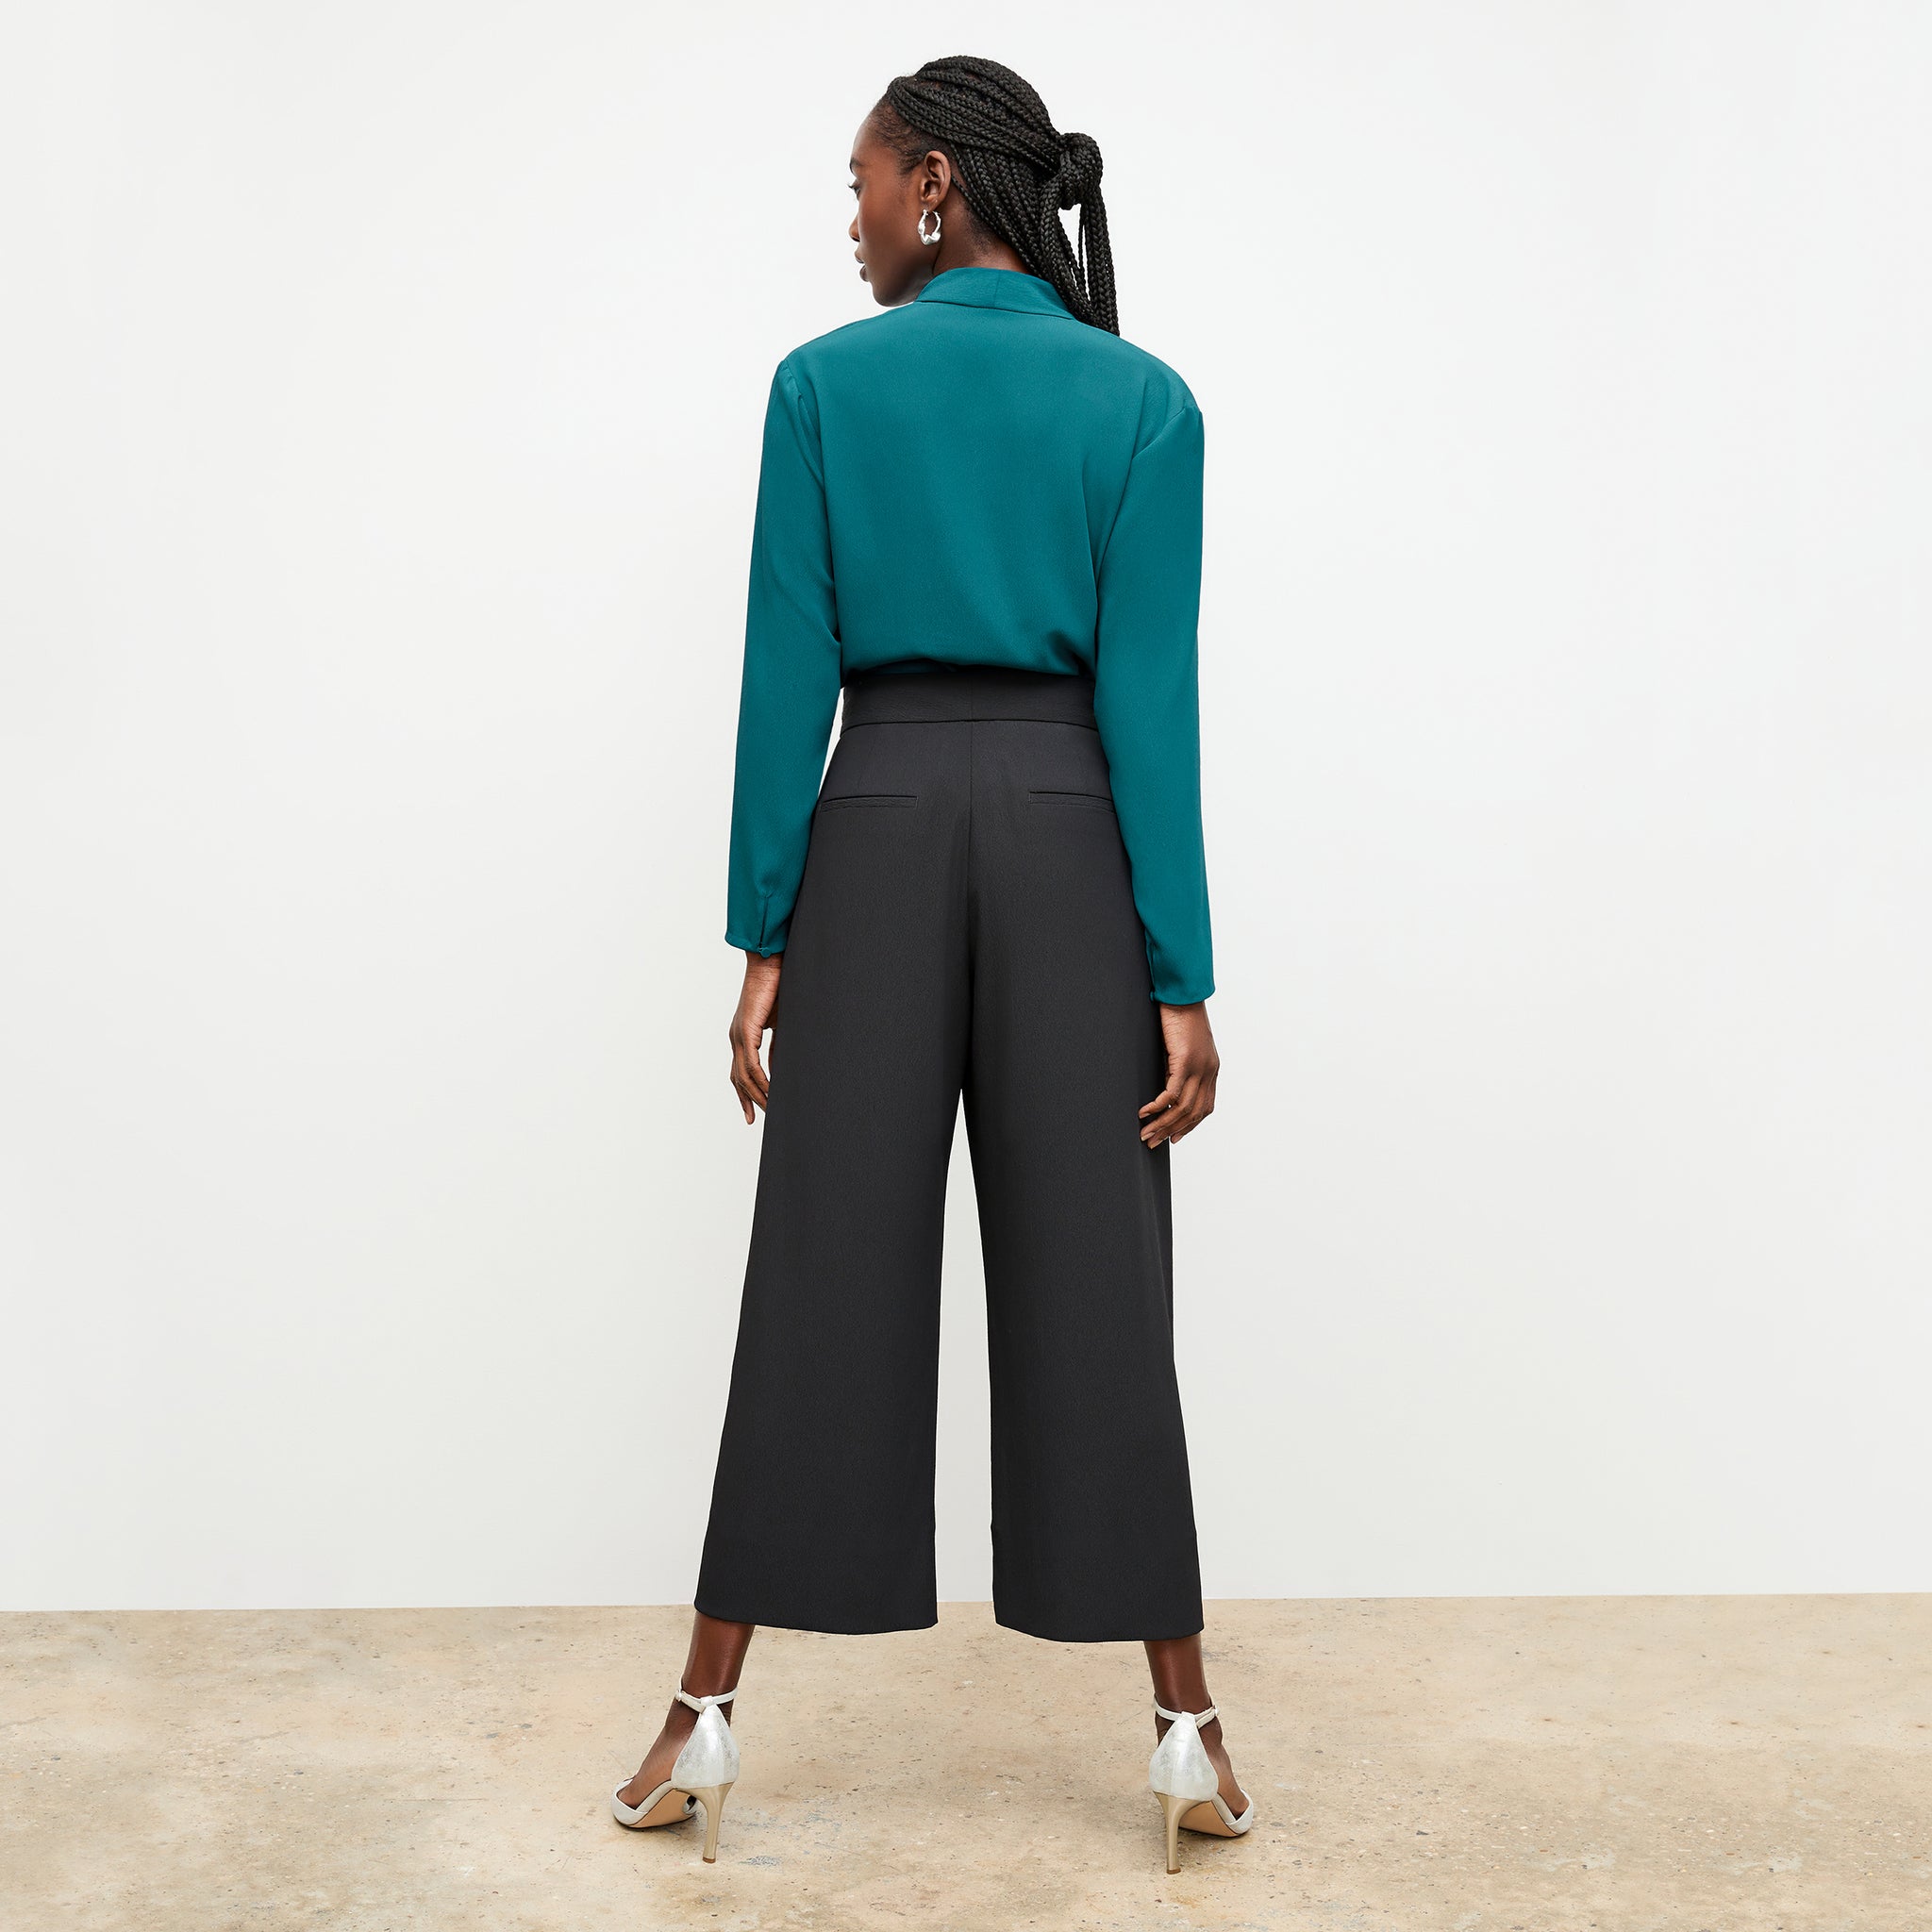 Back image of a woman standing wearing the Zhou culotte in black